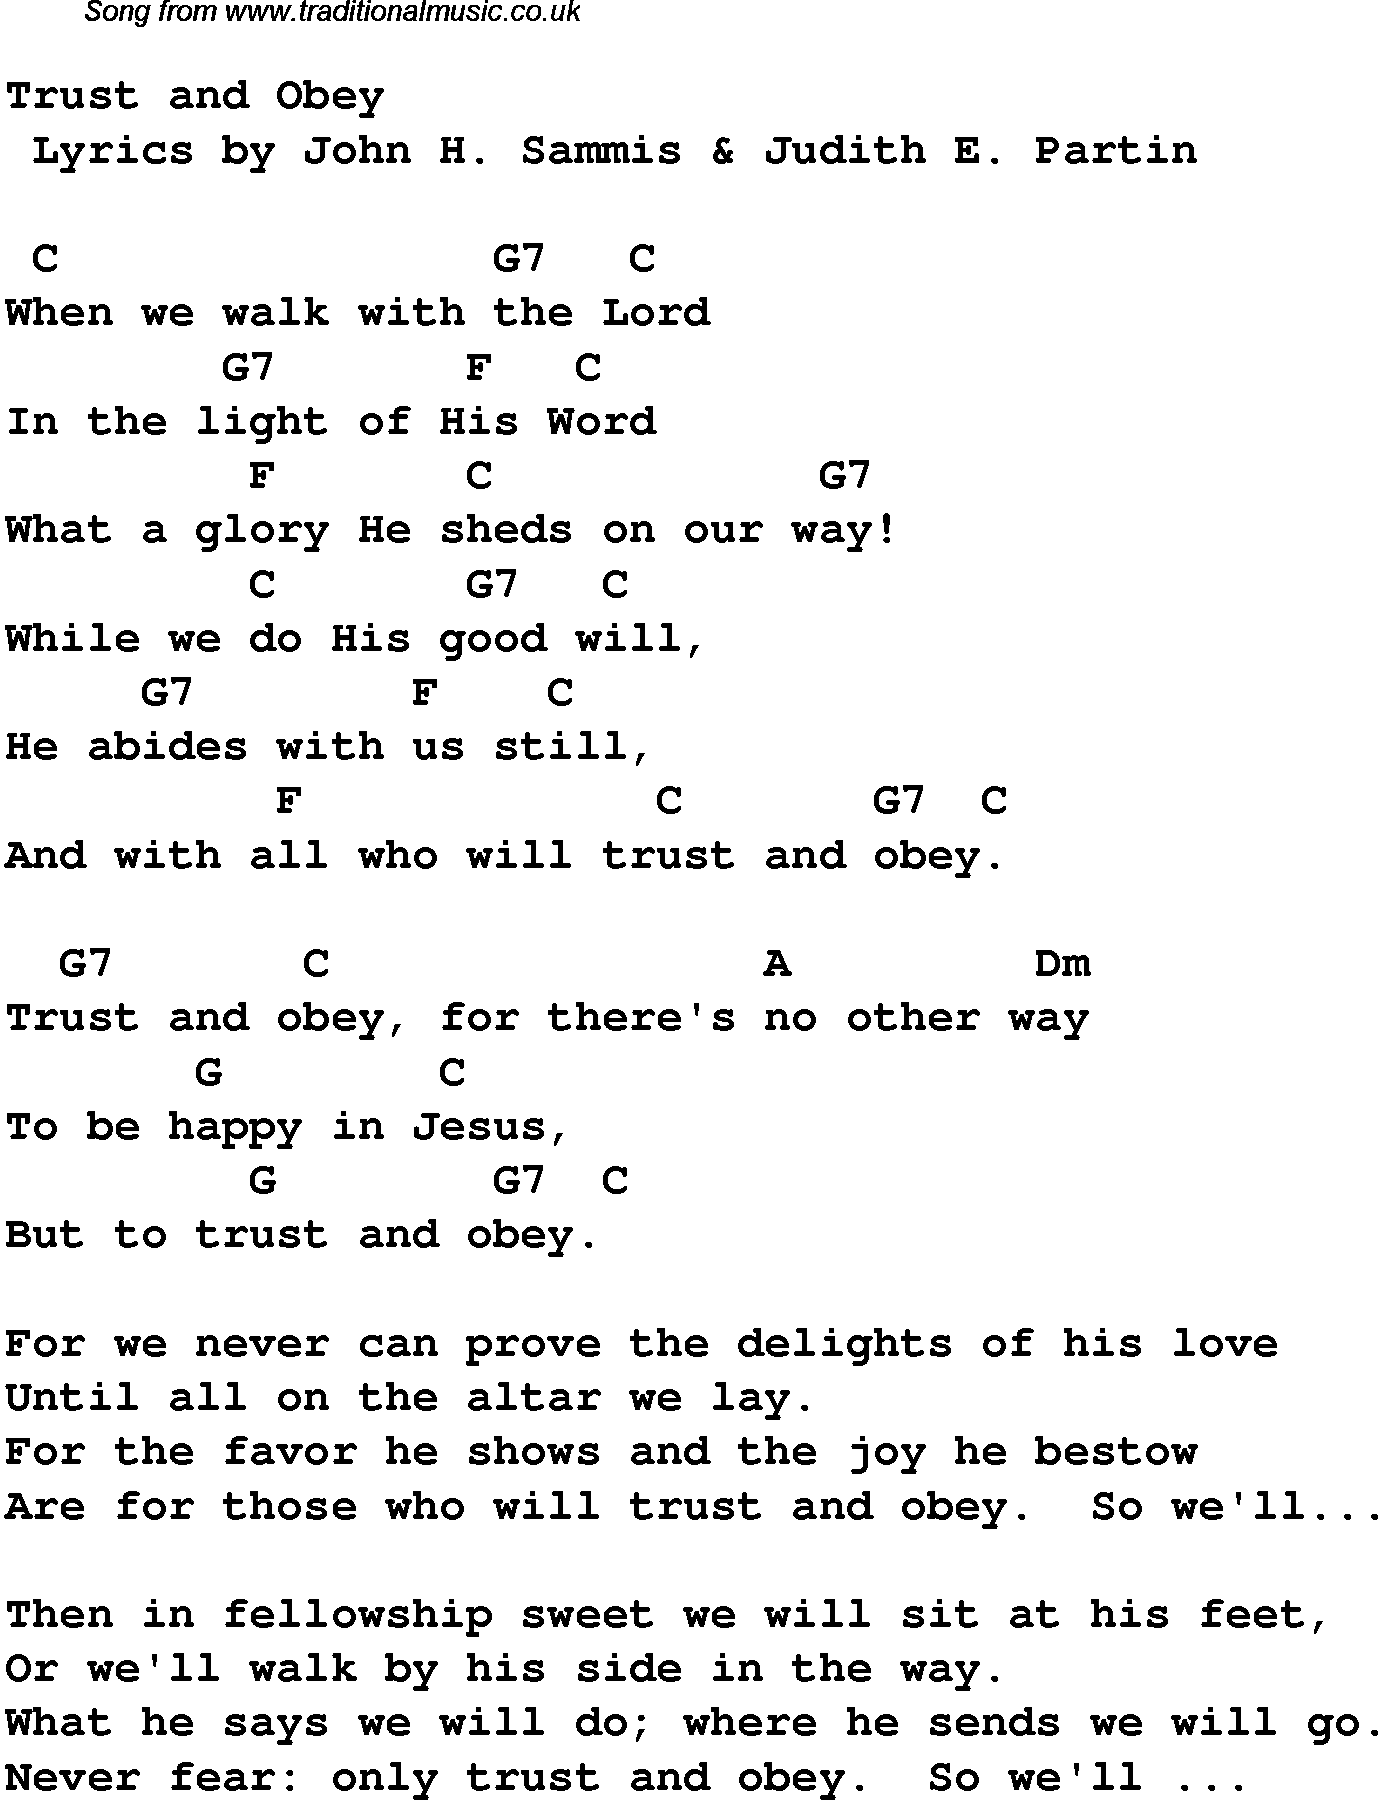 Gospel Song: trust-and-obey, lyrics and chords.